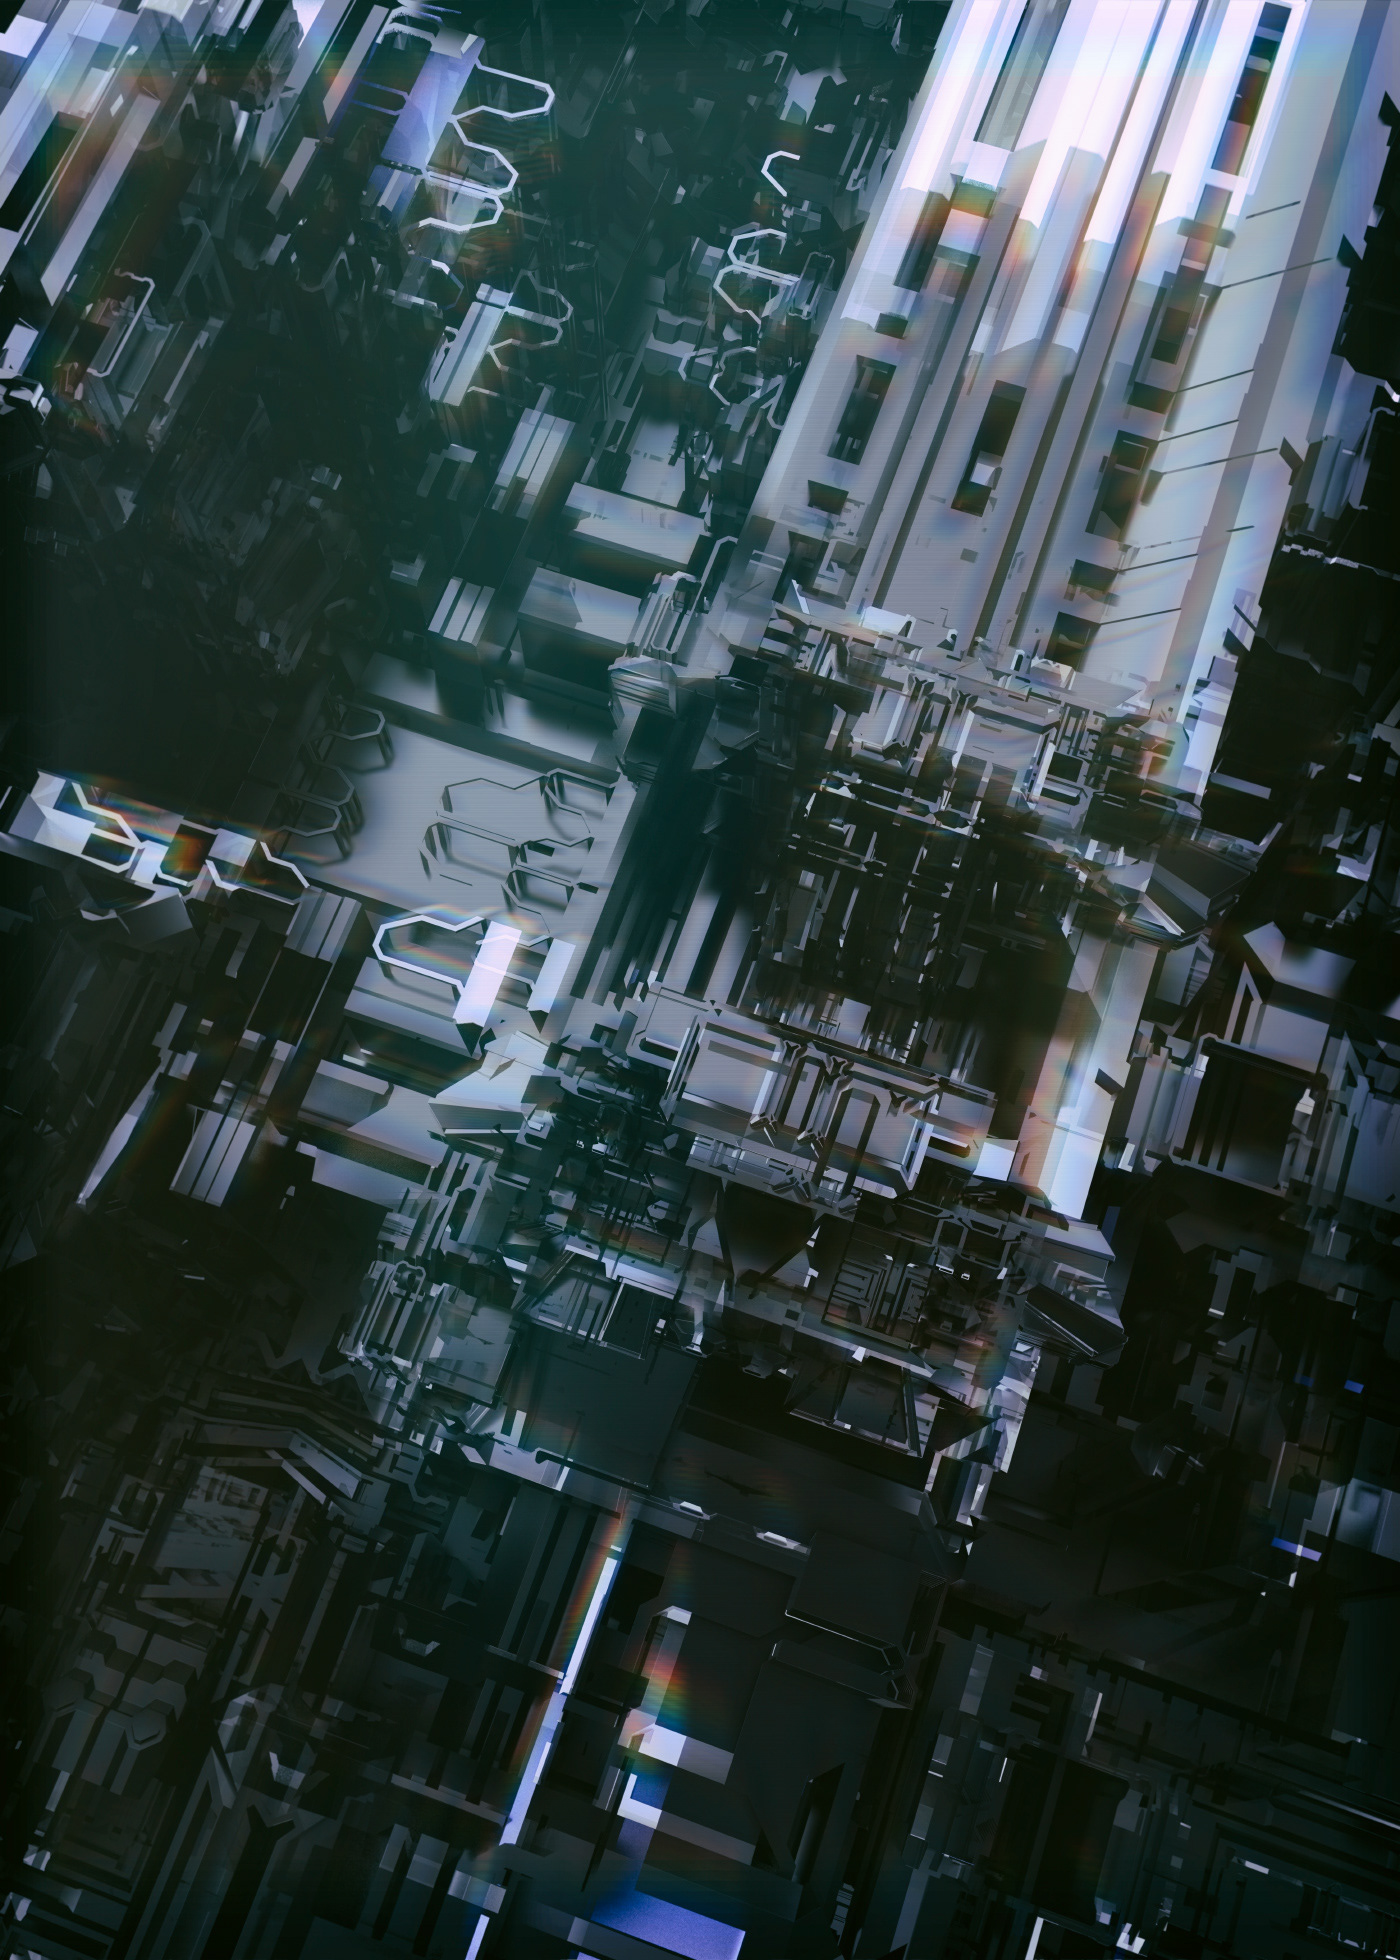 abstract machinery structures HardSurface Scifi